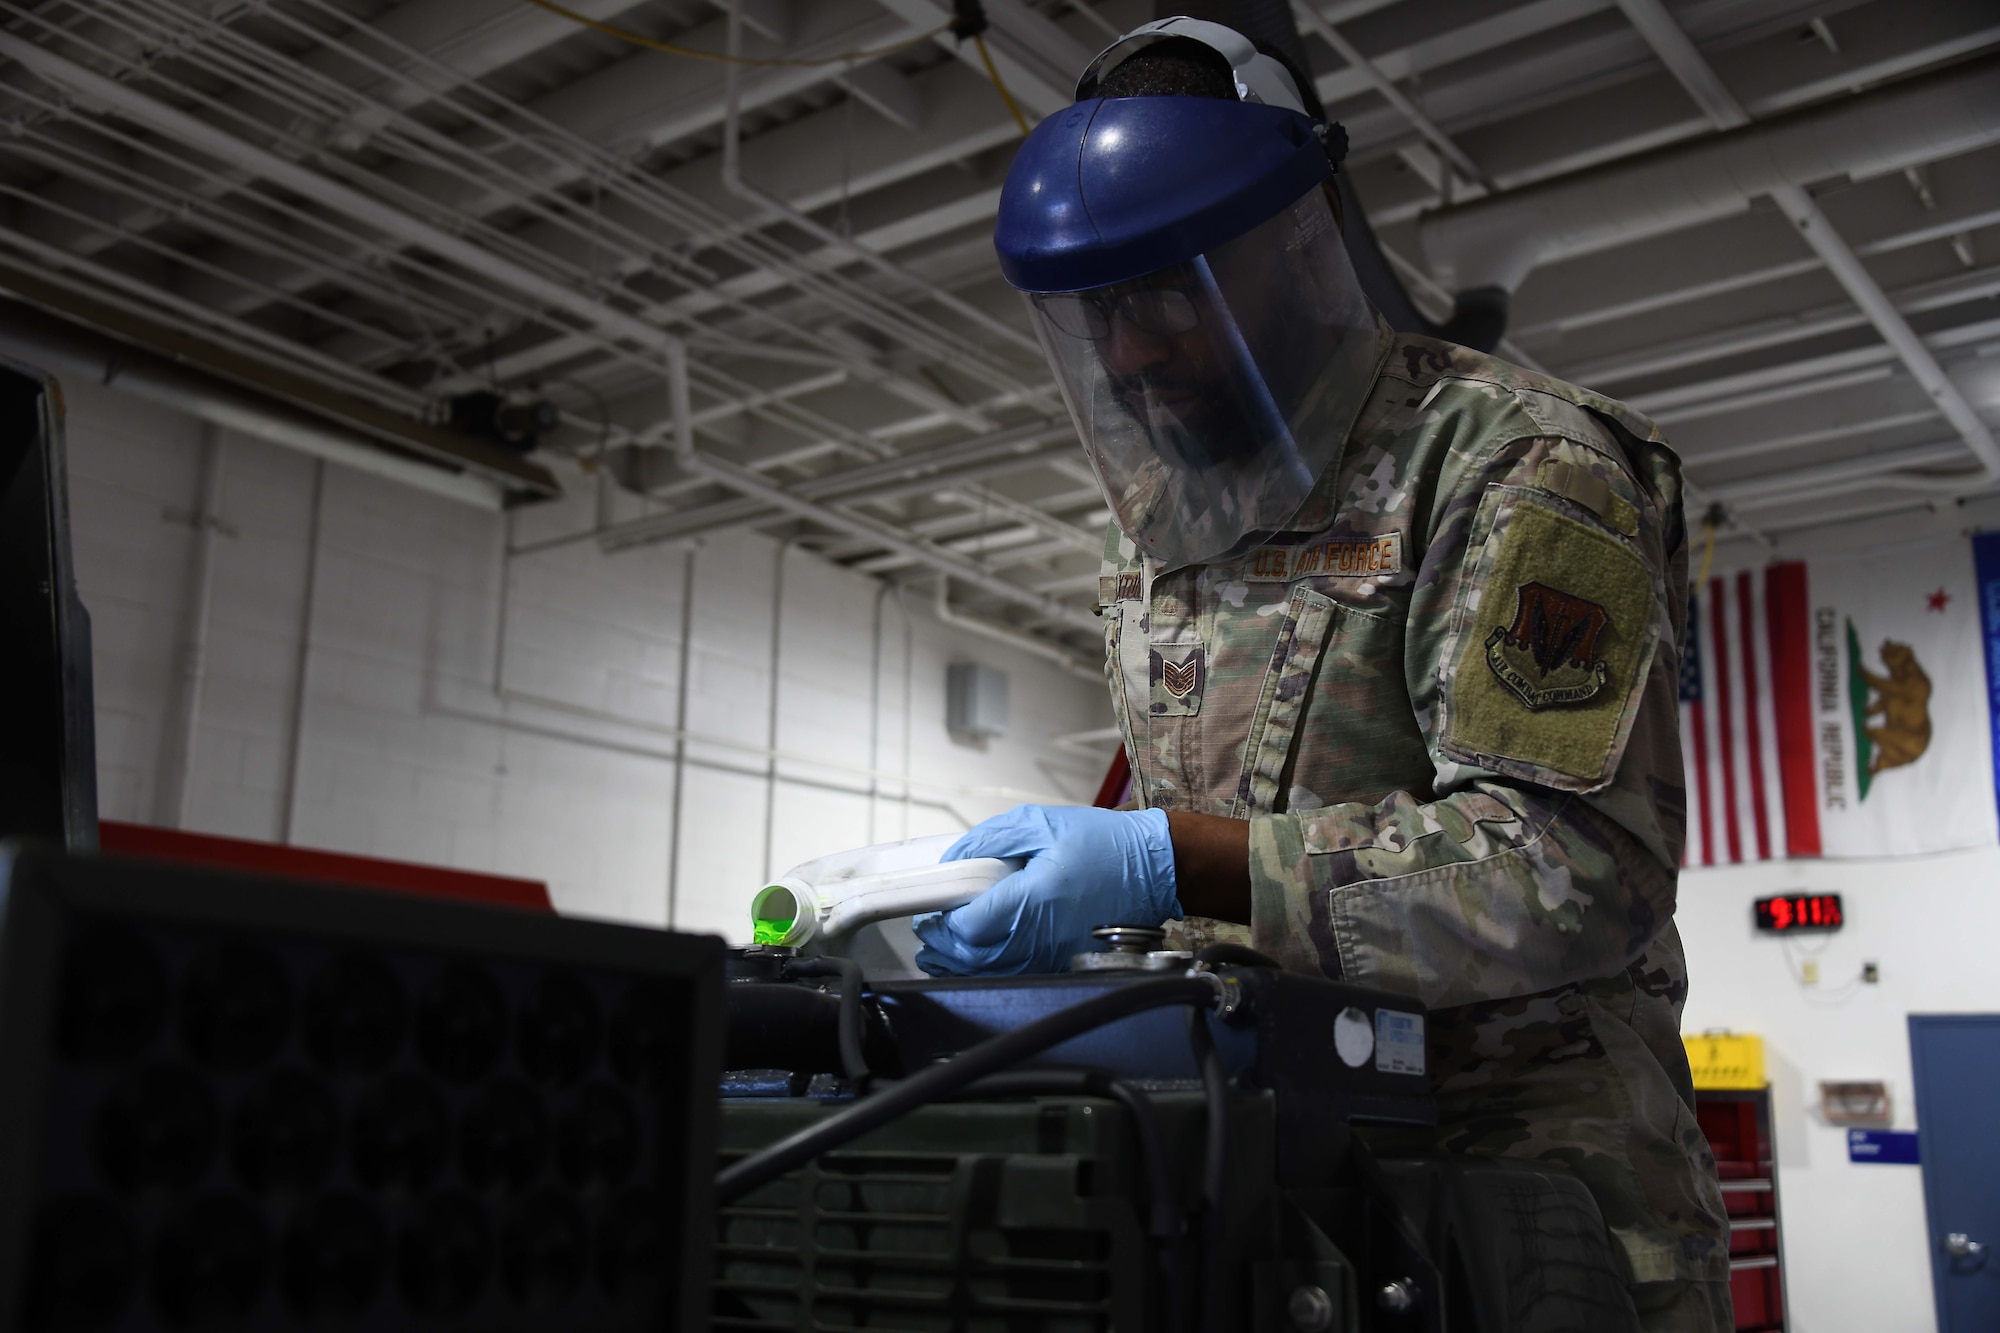 A US service member wearing green camo, a face shield and blue gloves pours green fluid into a metallic machine.